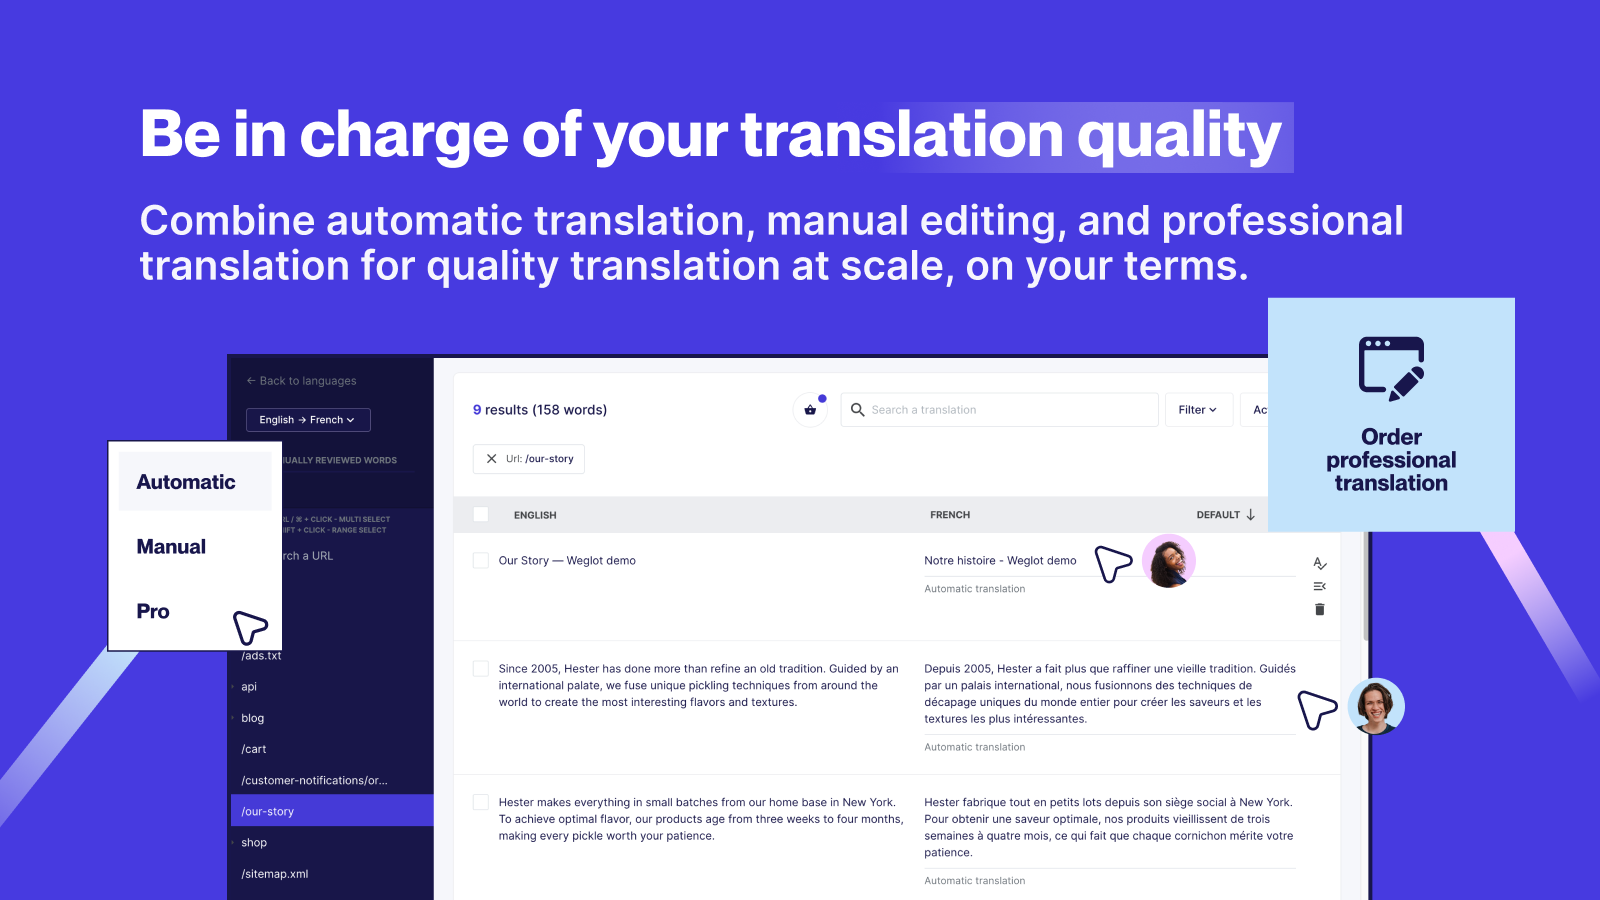 Manage all your translations in one place